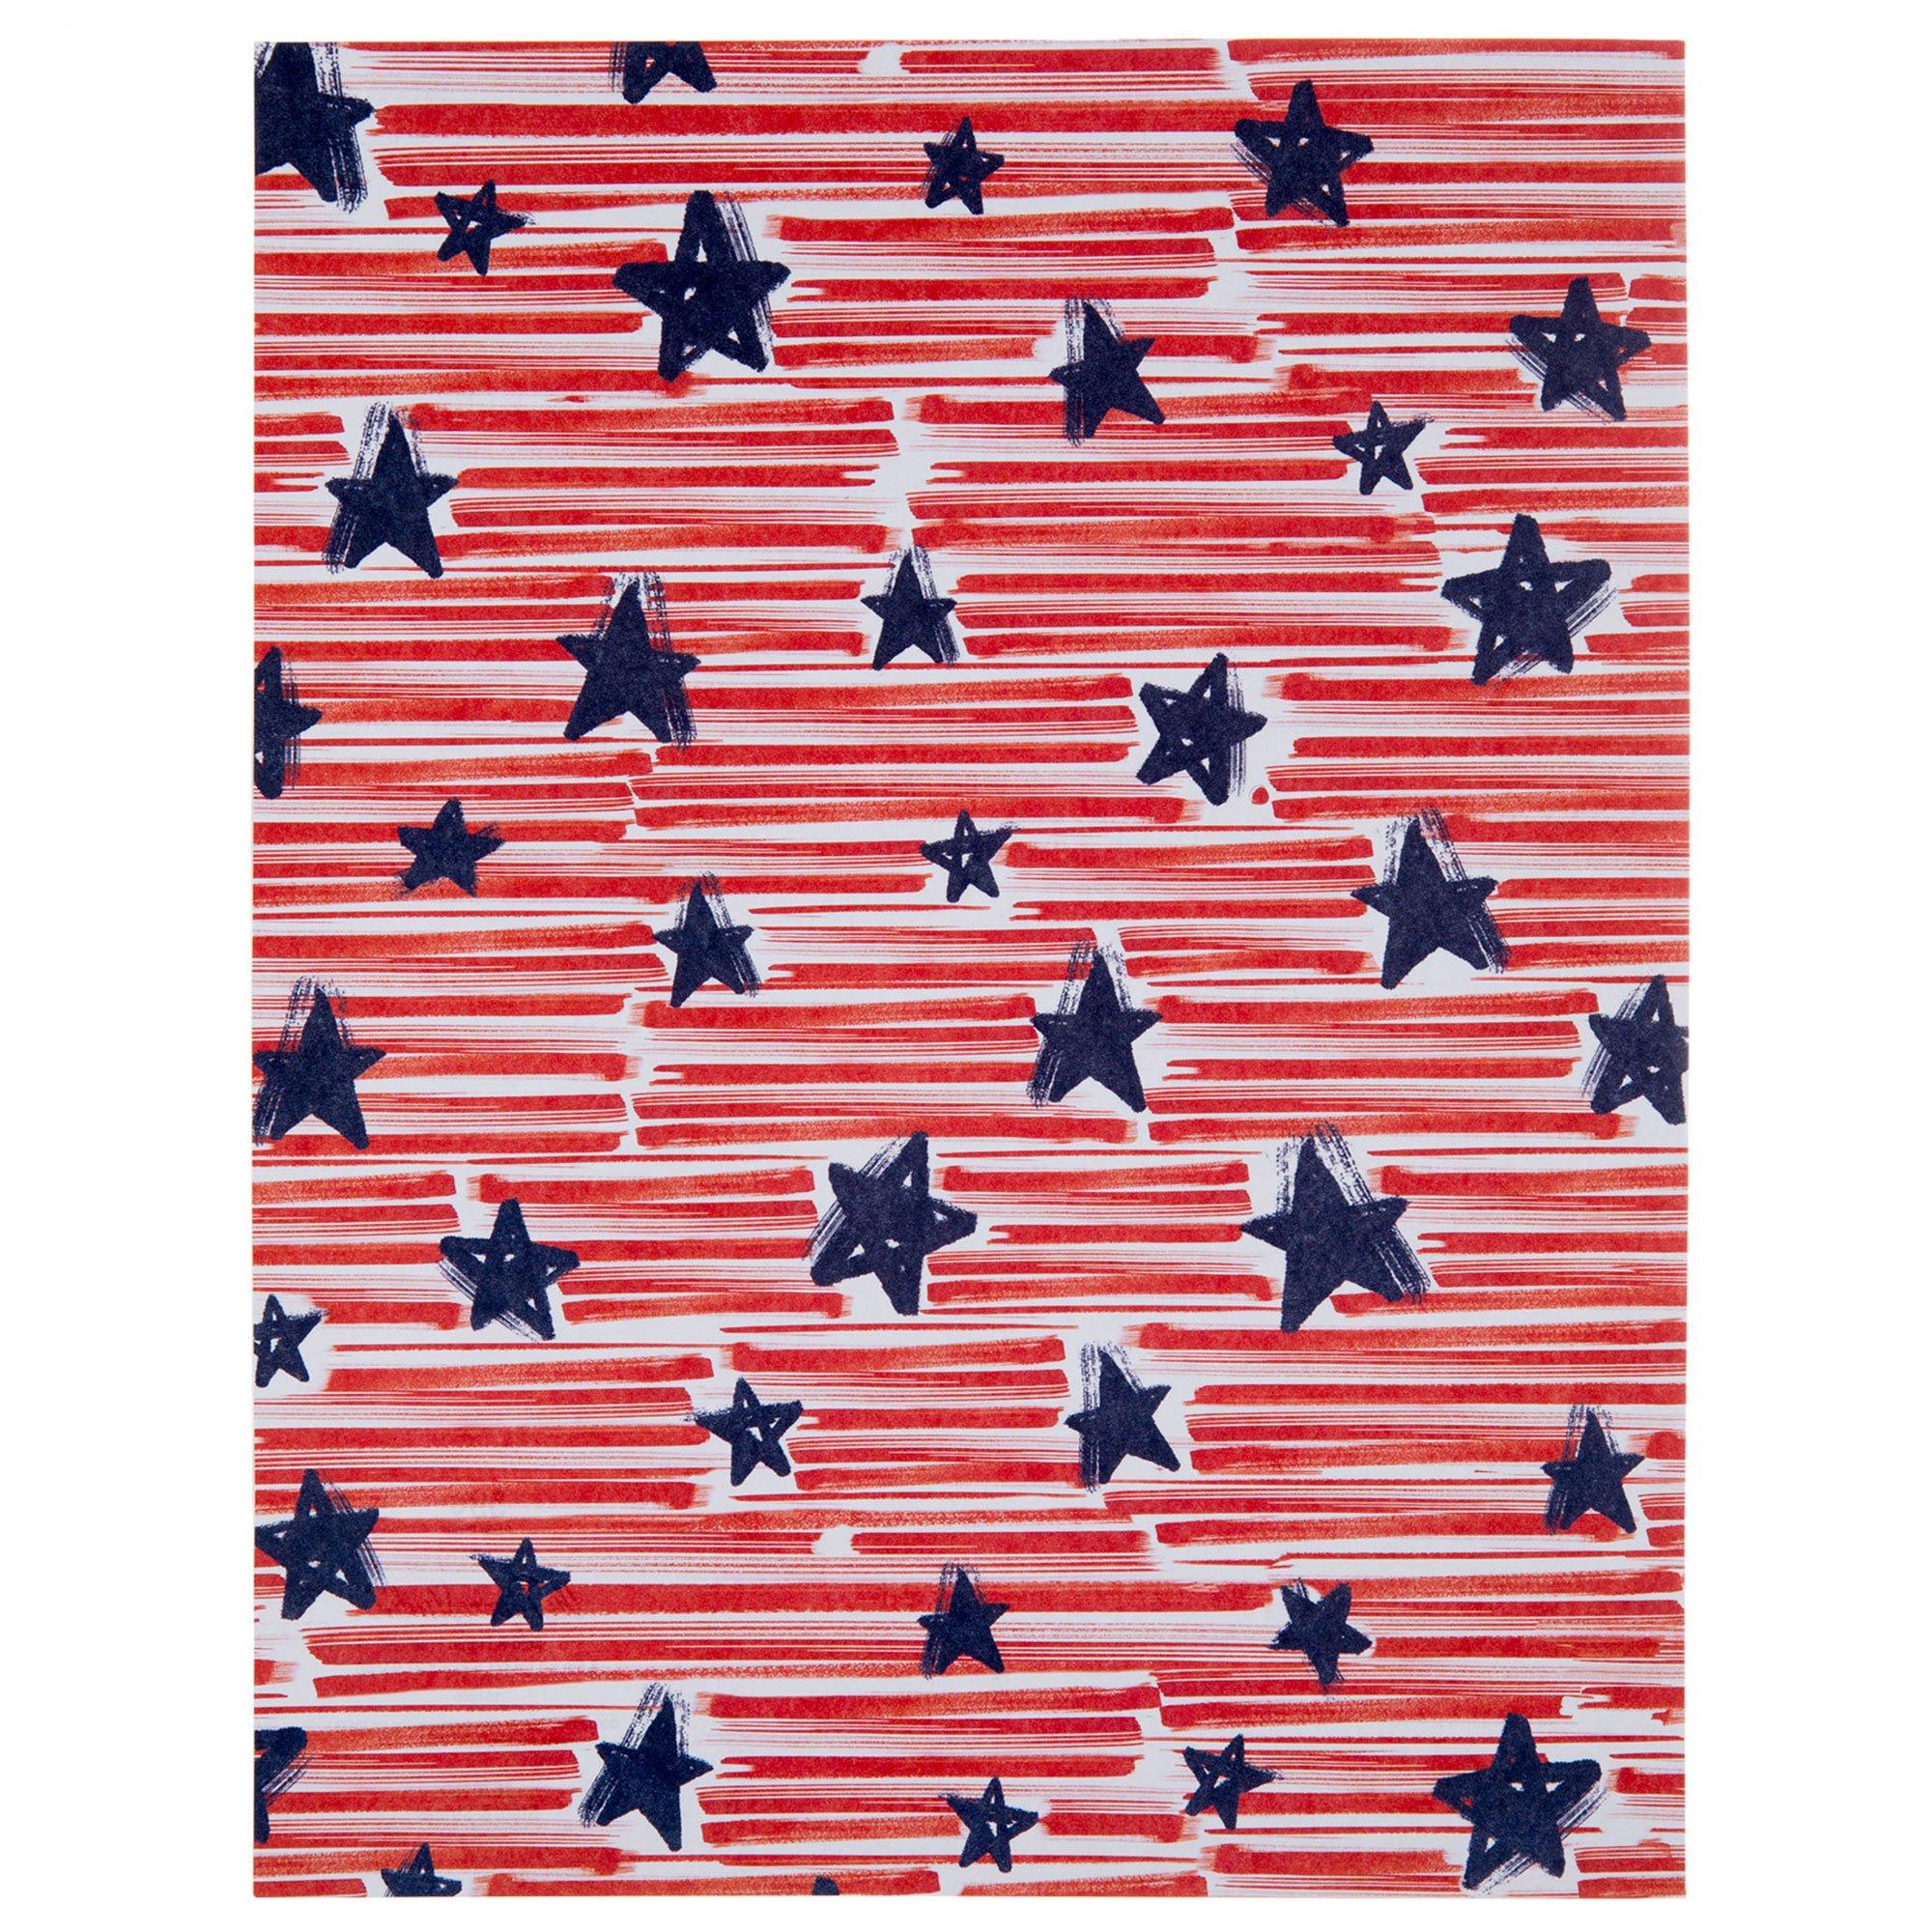 Stars and Bars - Star Spangled 12x12 Scrapbook Paper - 5 Sheets